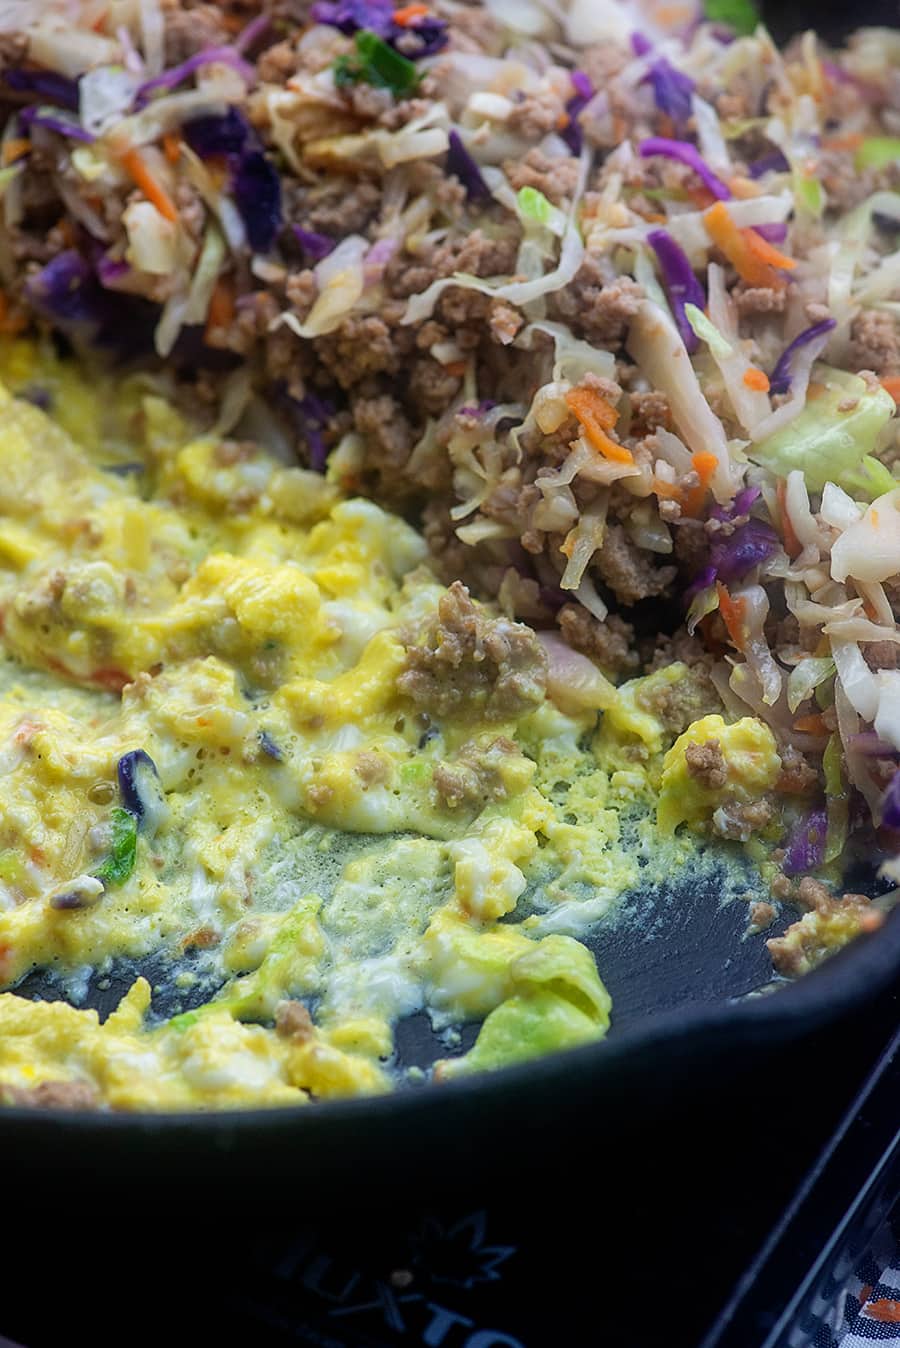 Eggs in skillet with coleslaw mix.